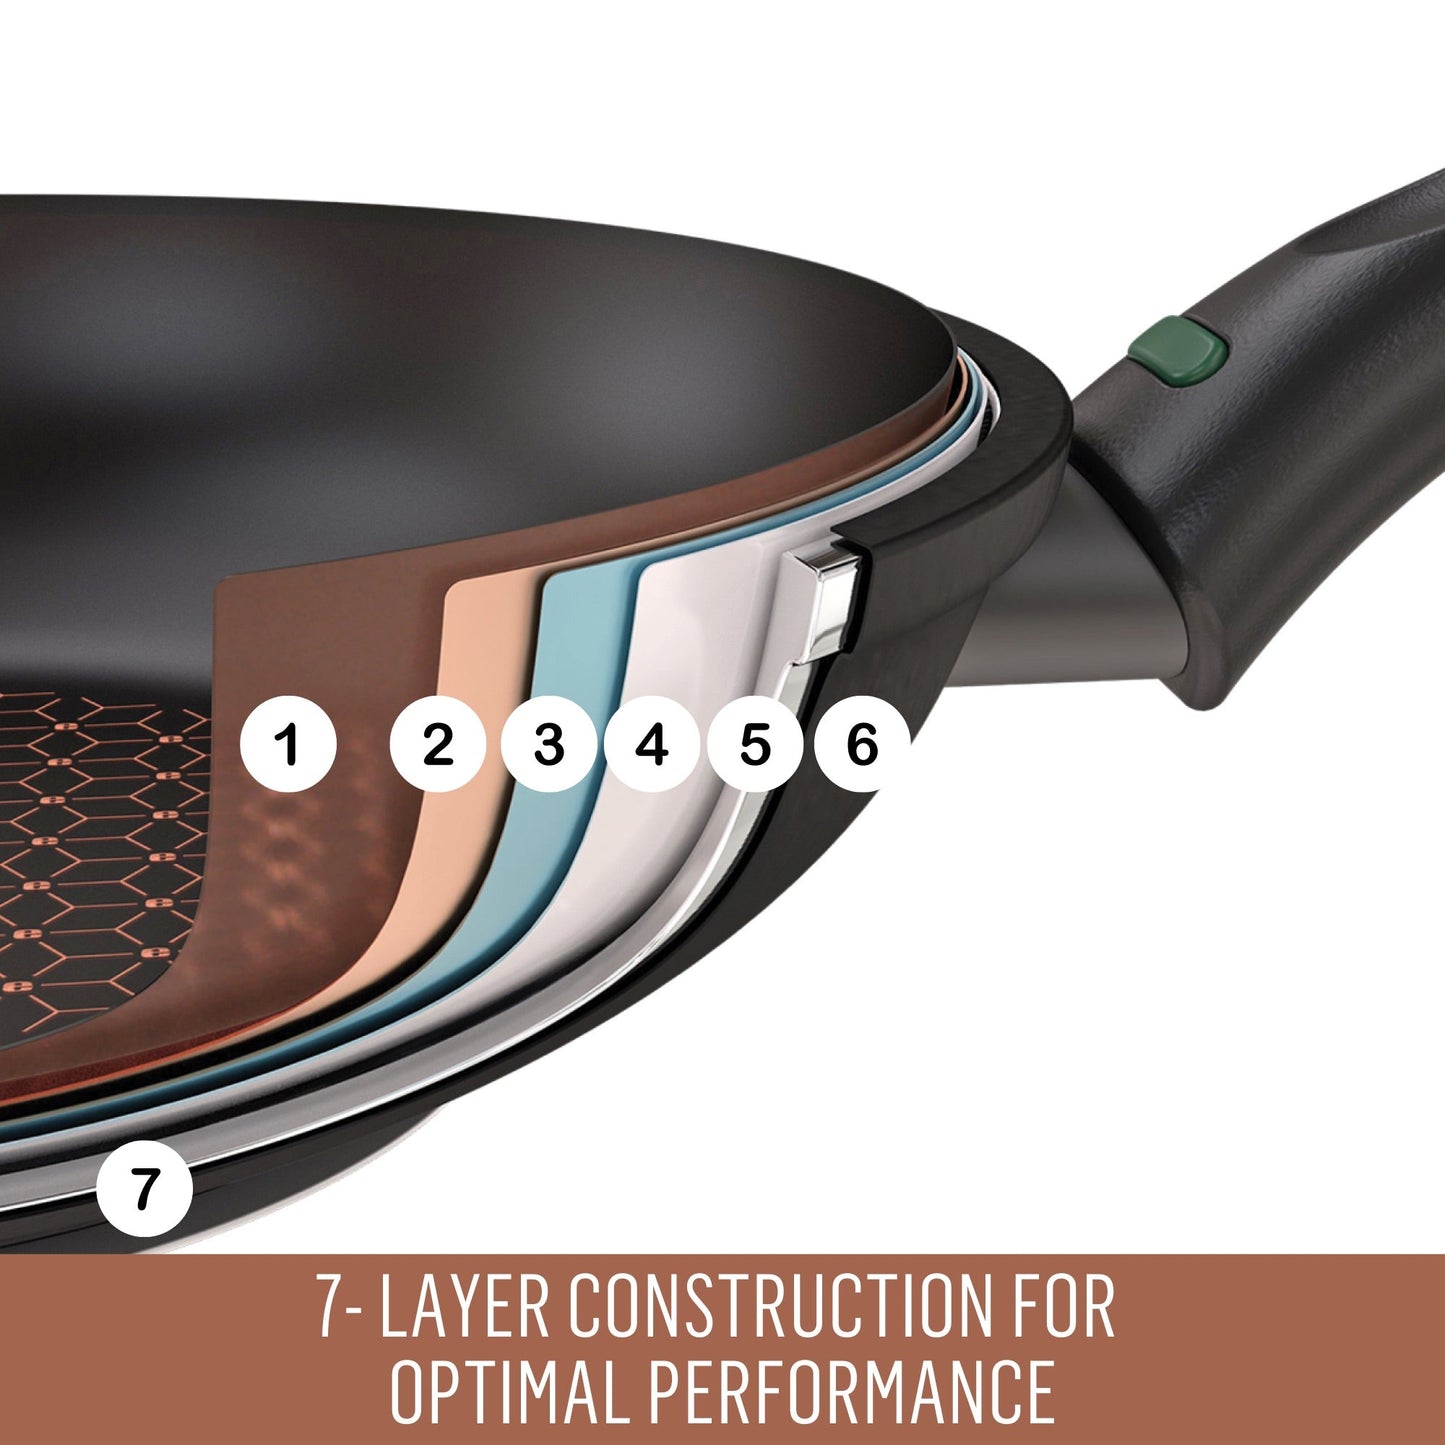 Essteele Per Salute Nonstick Induction Open French Skillet 20cm